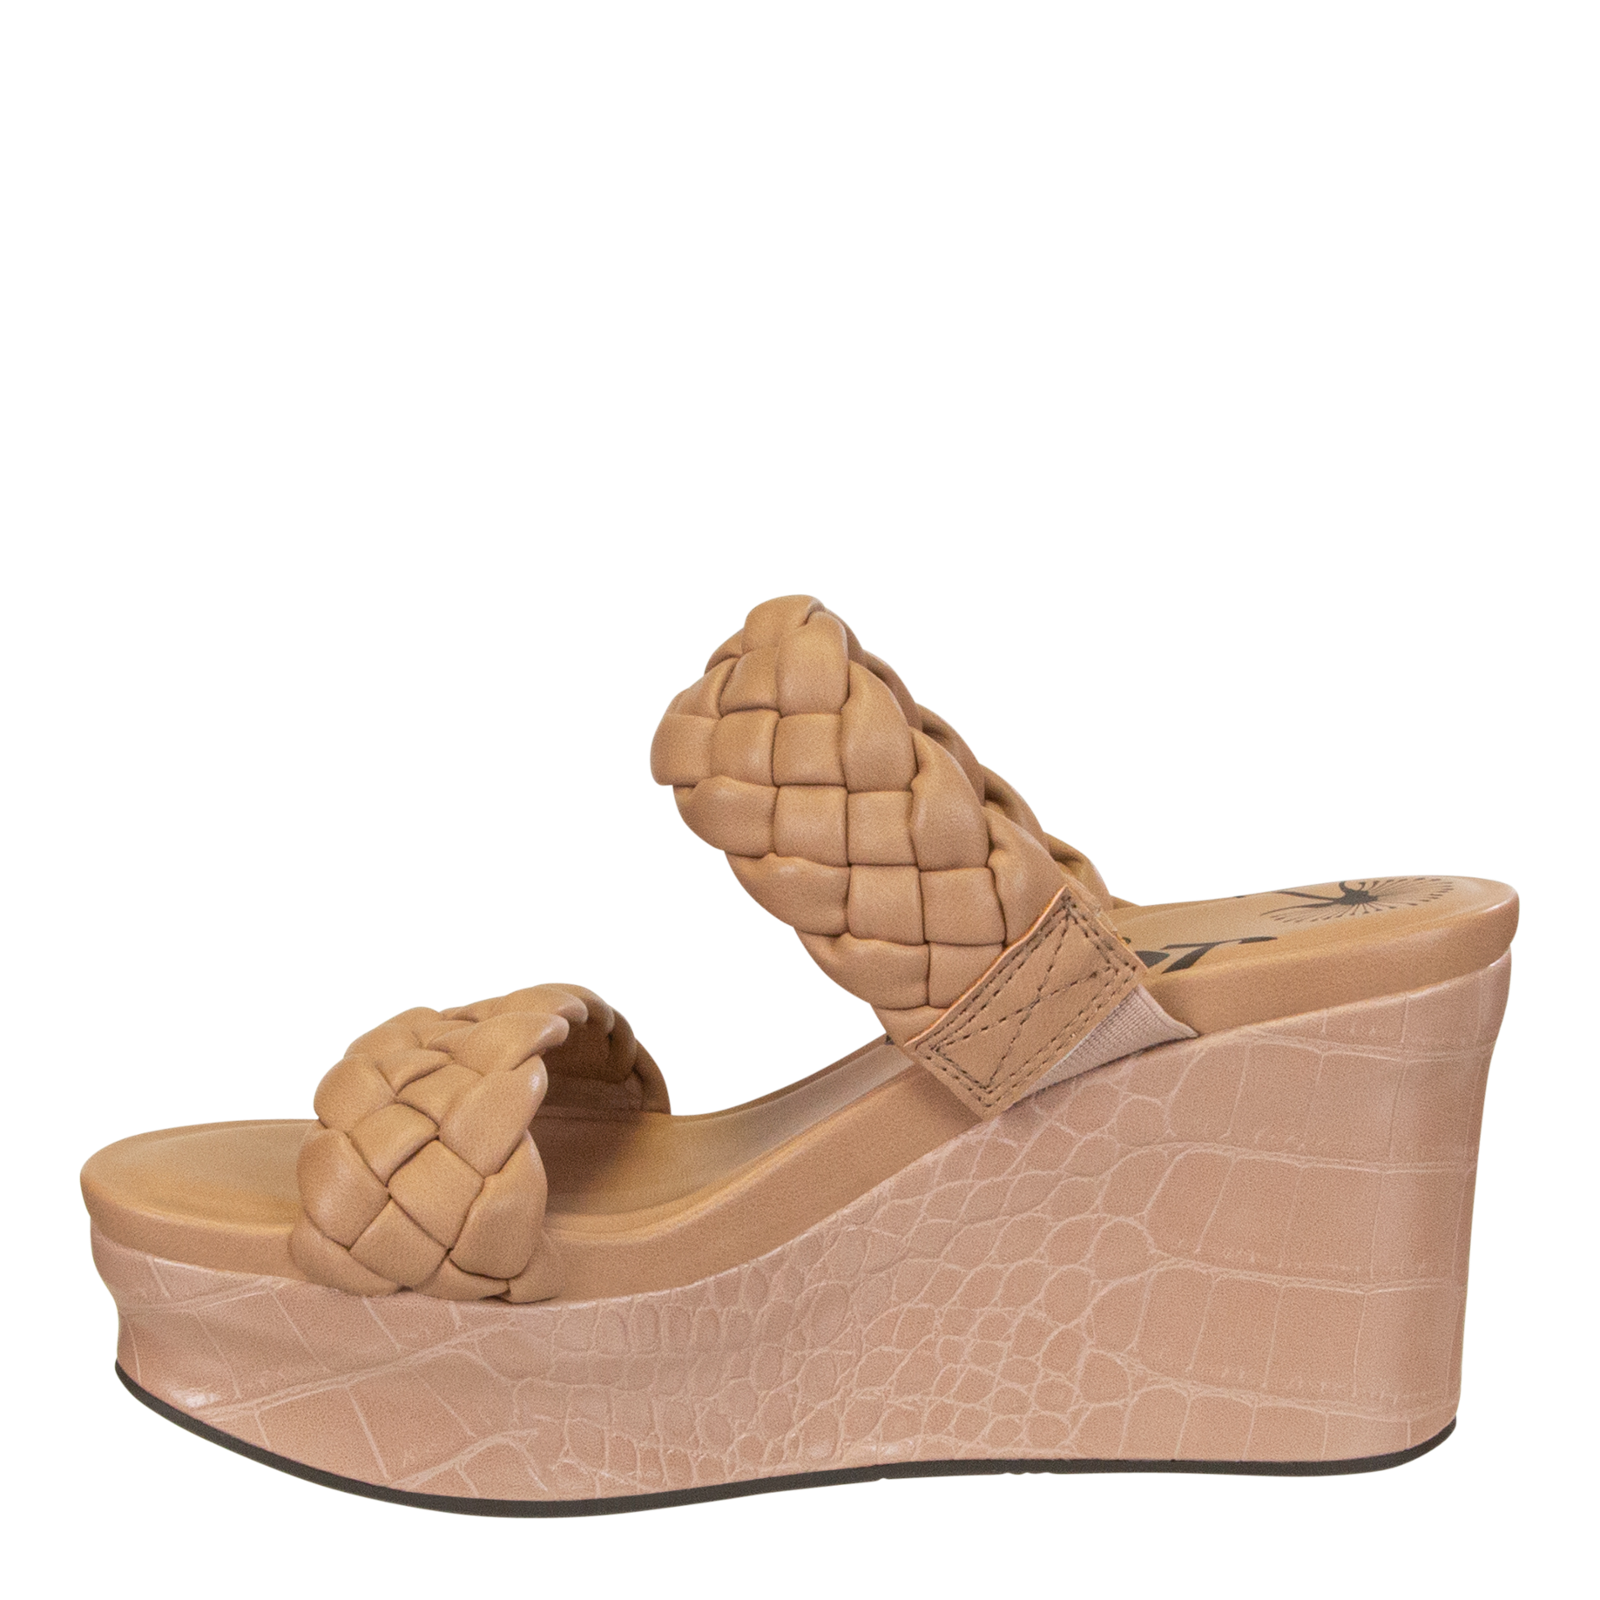 FLUENT in TAUPE Wedge Sandals